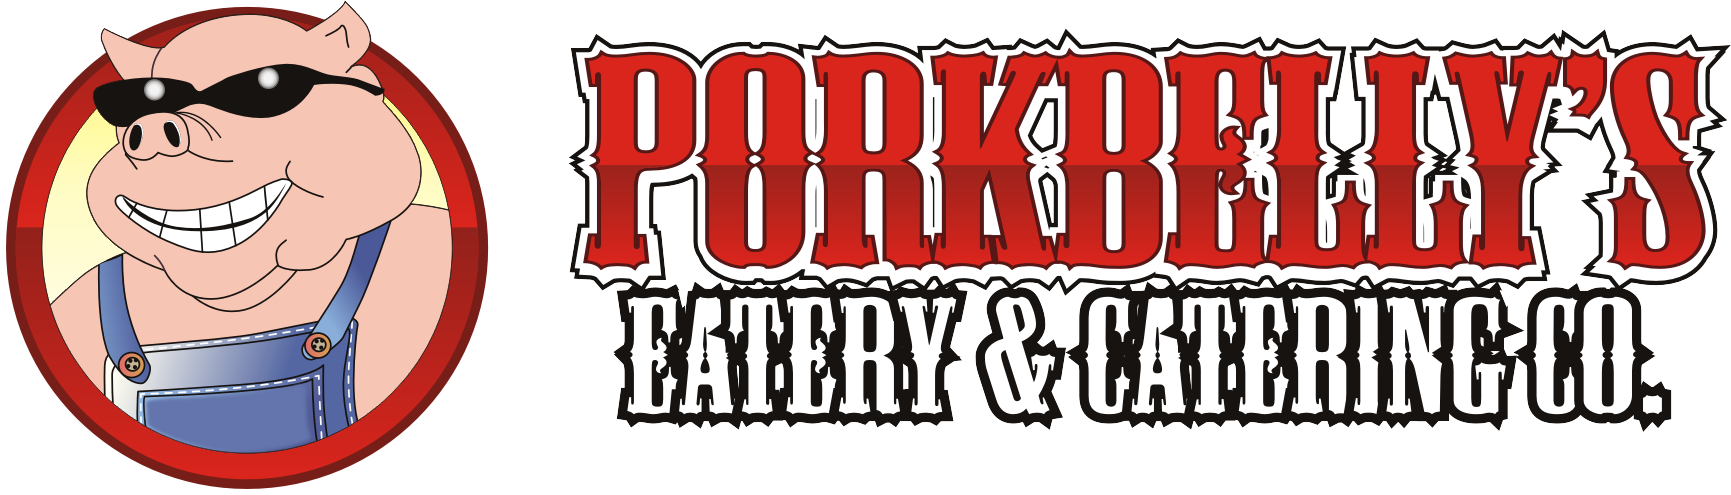 Pork Bellys Eatery and Catering Co - PB1